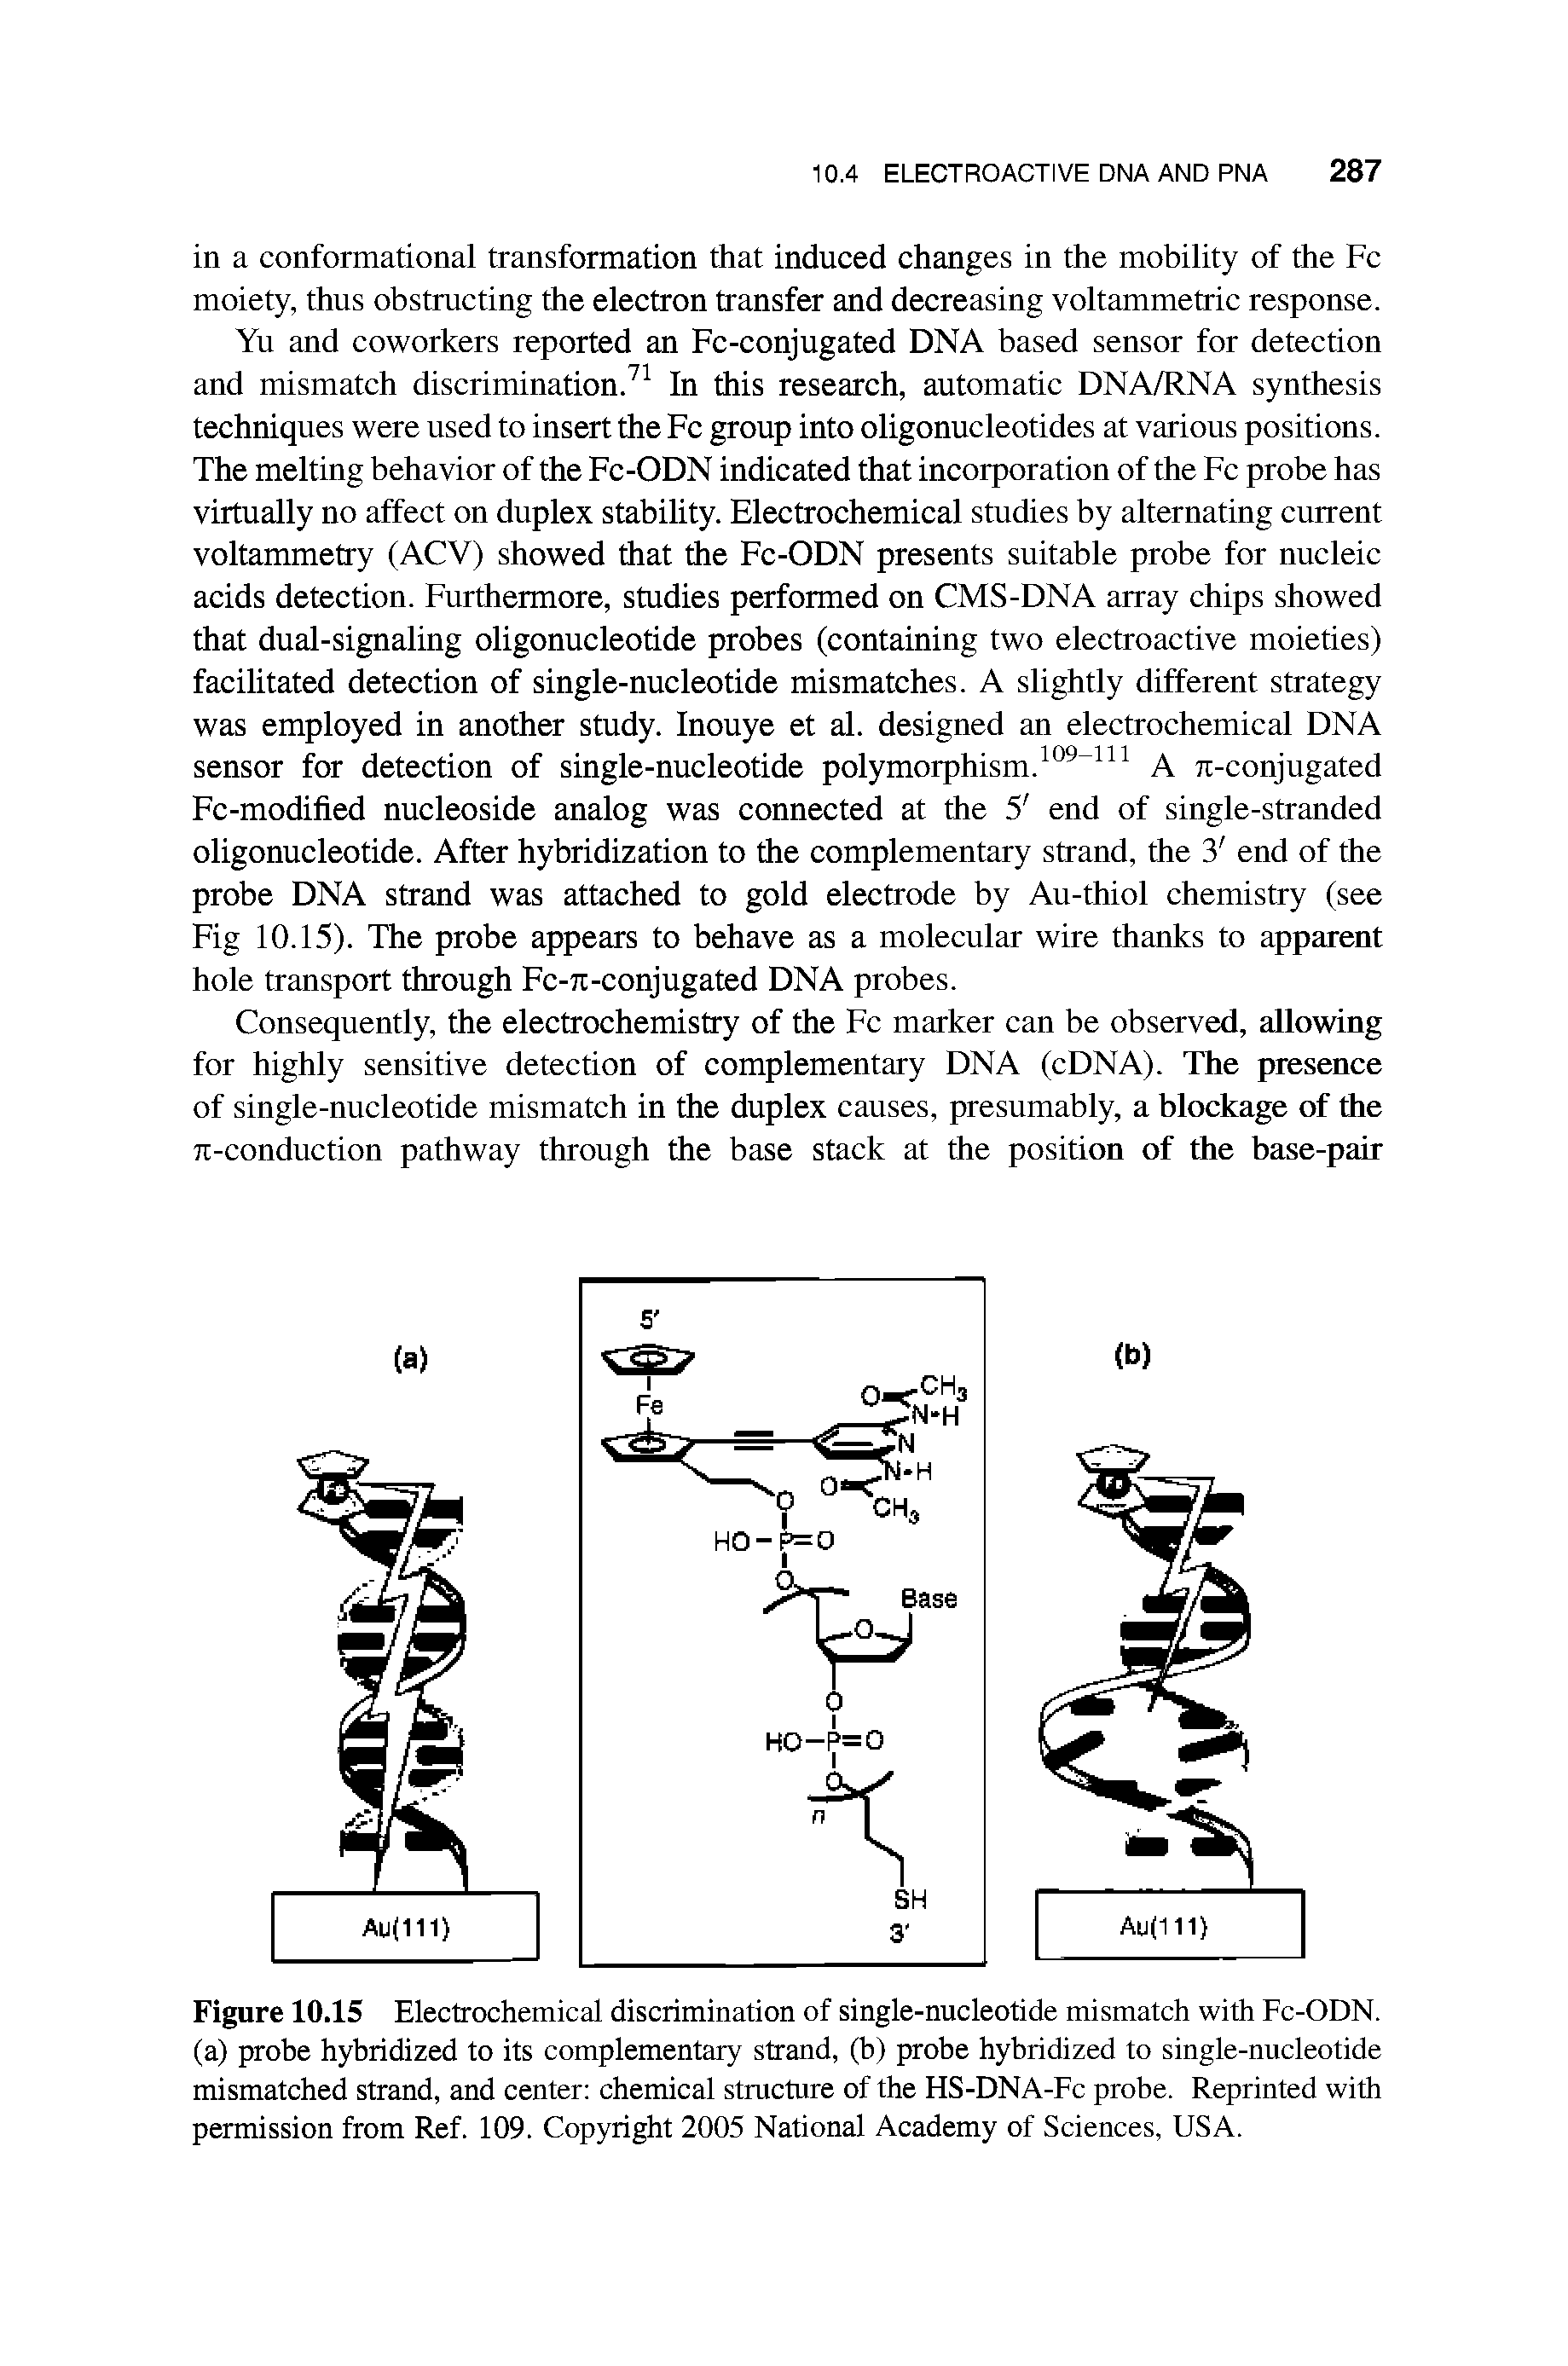 Figure 10.15 Electrochemical discrimination of single-nucleotide mismatch with Fc-ODN. (a) probe hybridized to its complementary strand, (b) probe hybridized to single-nucleotide mismatched strand, and center chemical structure of the HS-DNA-Fc probe. Reprinted with permission from Ref. 109. Copyright 2005 National Academy of Sciences, USA.